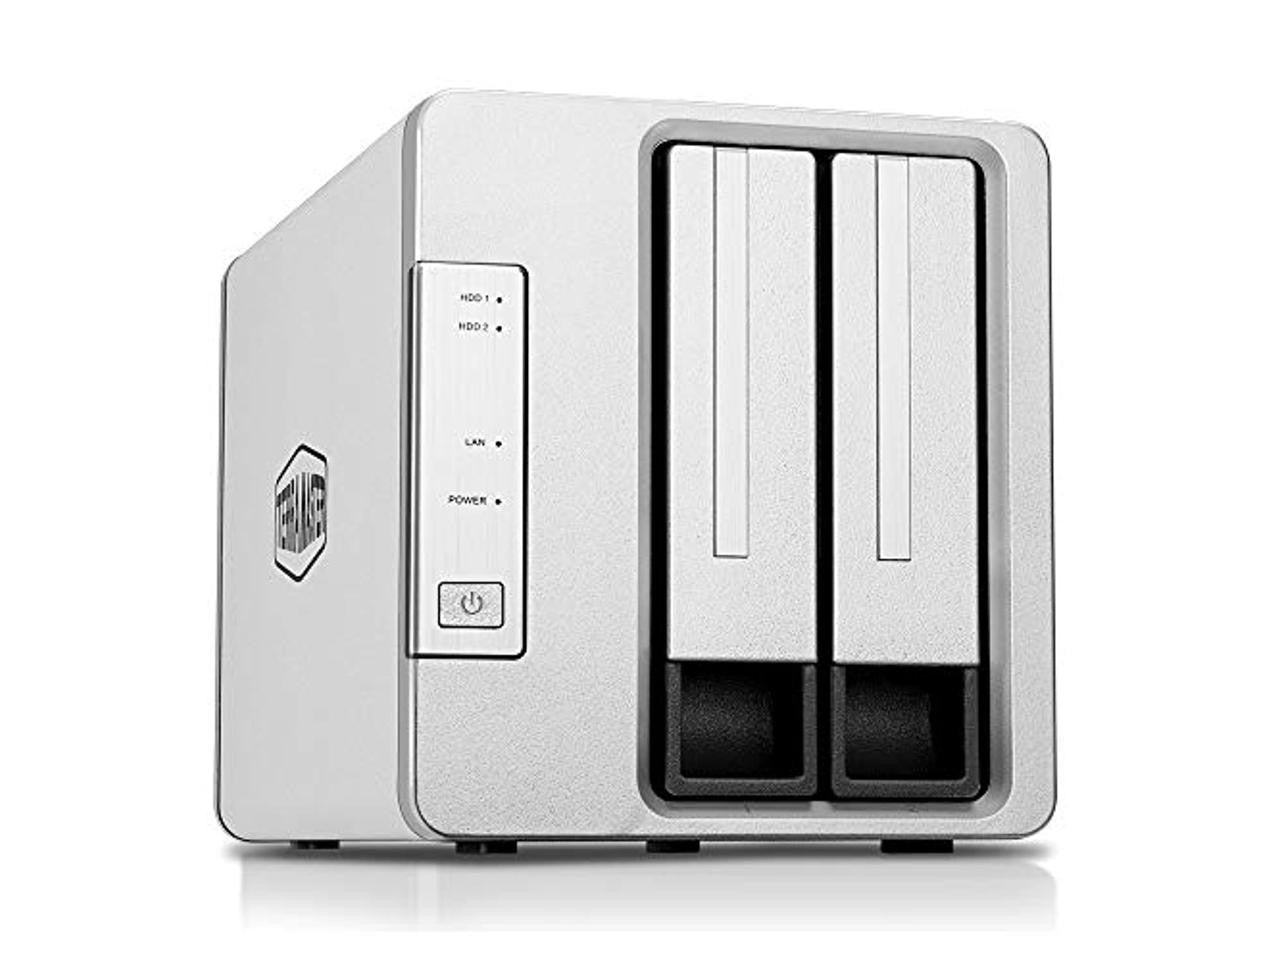 TerraMaster F2-210 2-Bay Home NAS with 4TB (2 x 2TB) of Seagate Ironwolf NAS Drives Fully Assembled and Tested